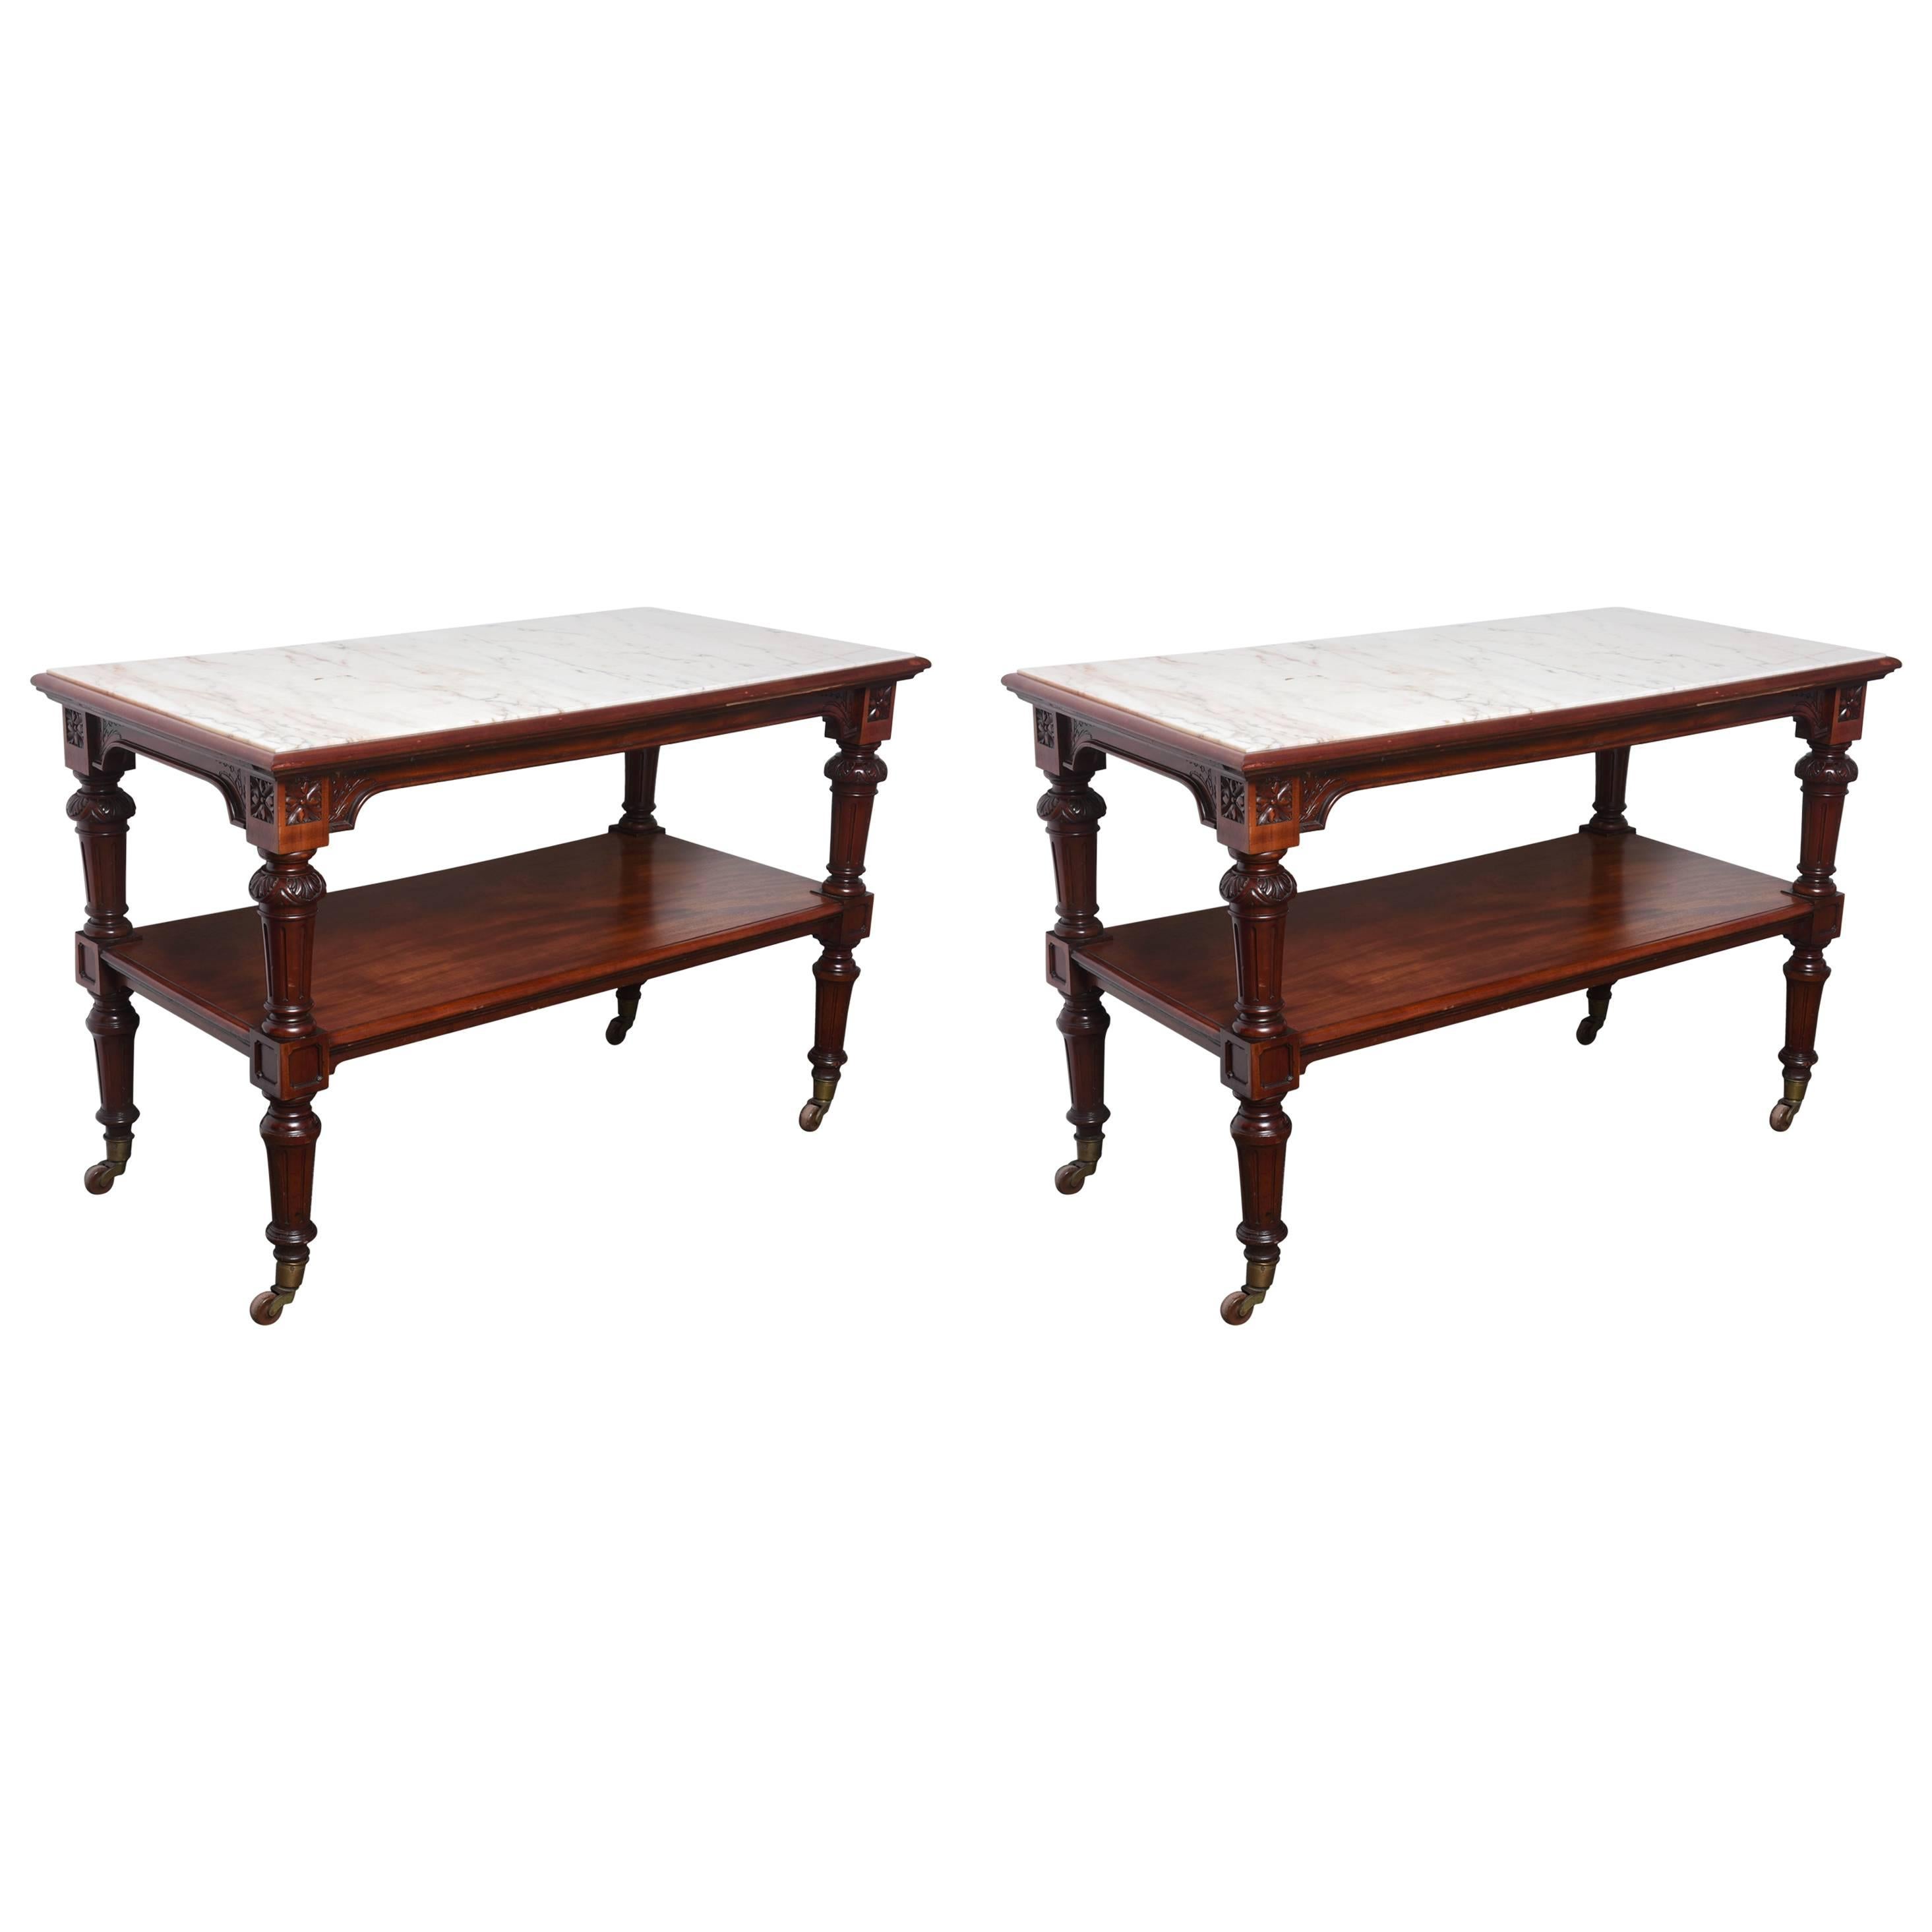 Amazing Pair of 19th Century Marble-Top Carved Mahogany Console Tables